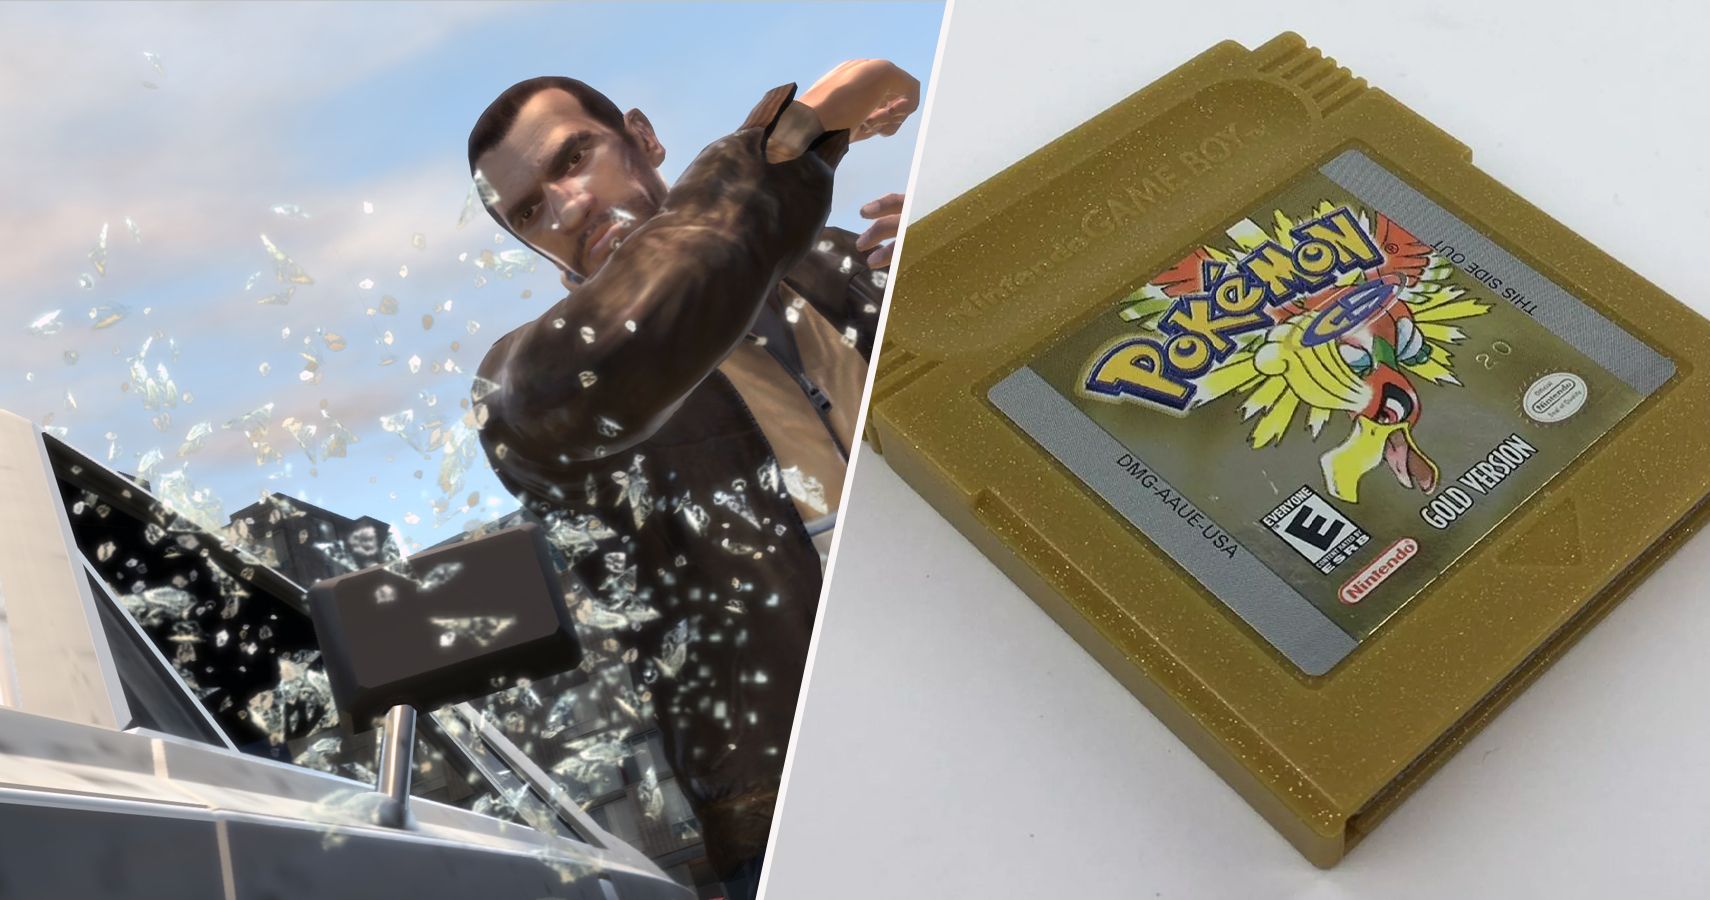 The 20 Worst Video Games Of All Time According To IGN (And The 10